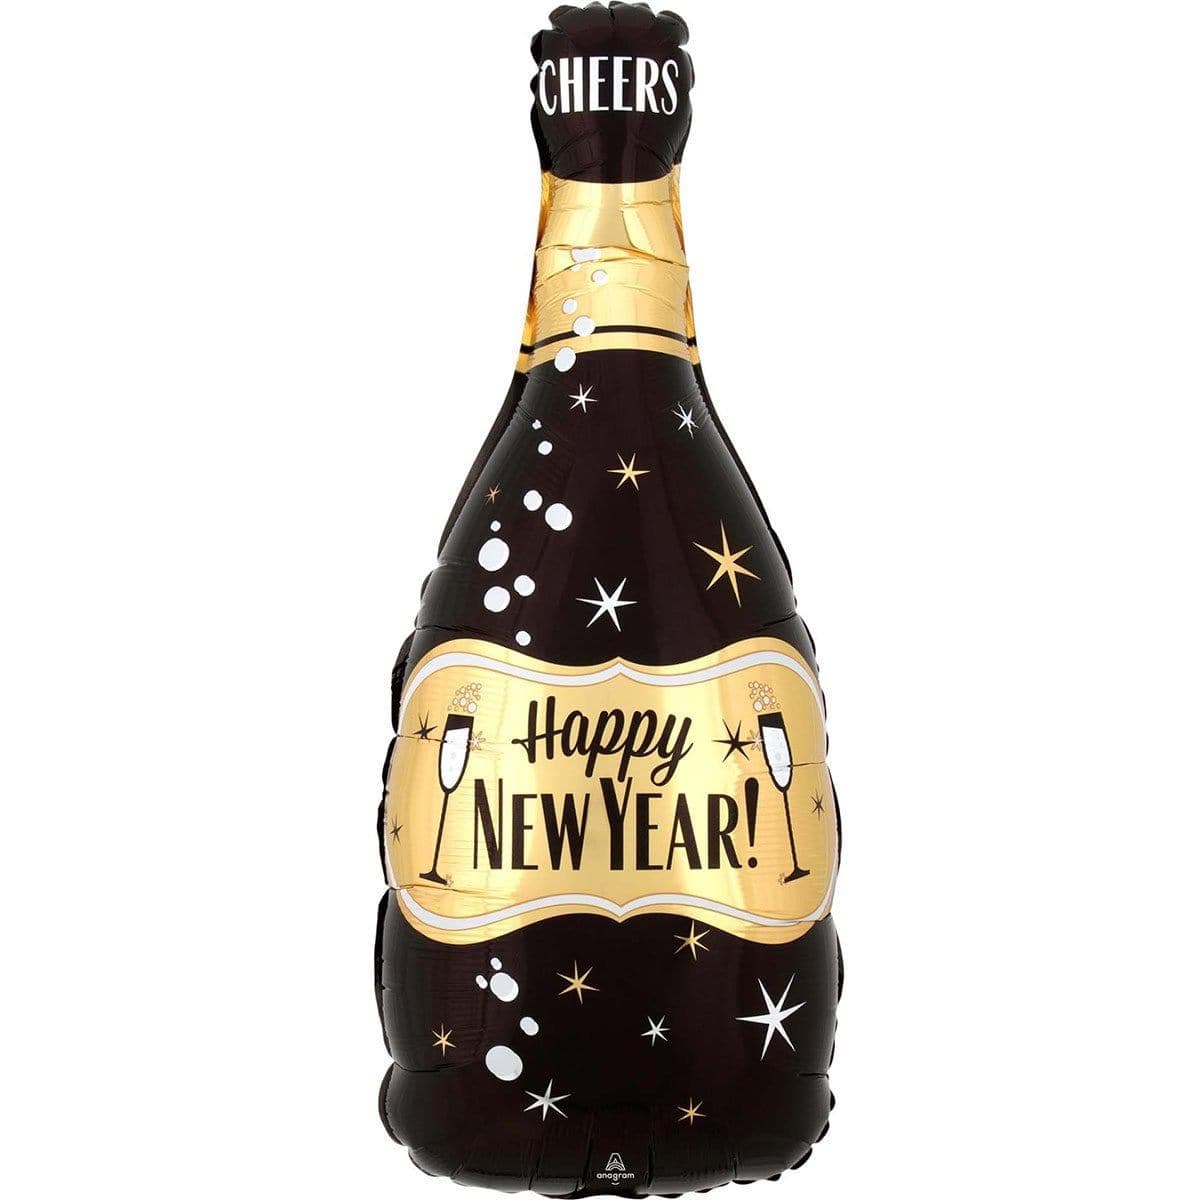 Buy Balloons Black Bottle Foil Balloon, 18 inches sold at Party Expert